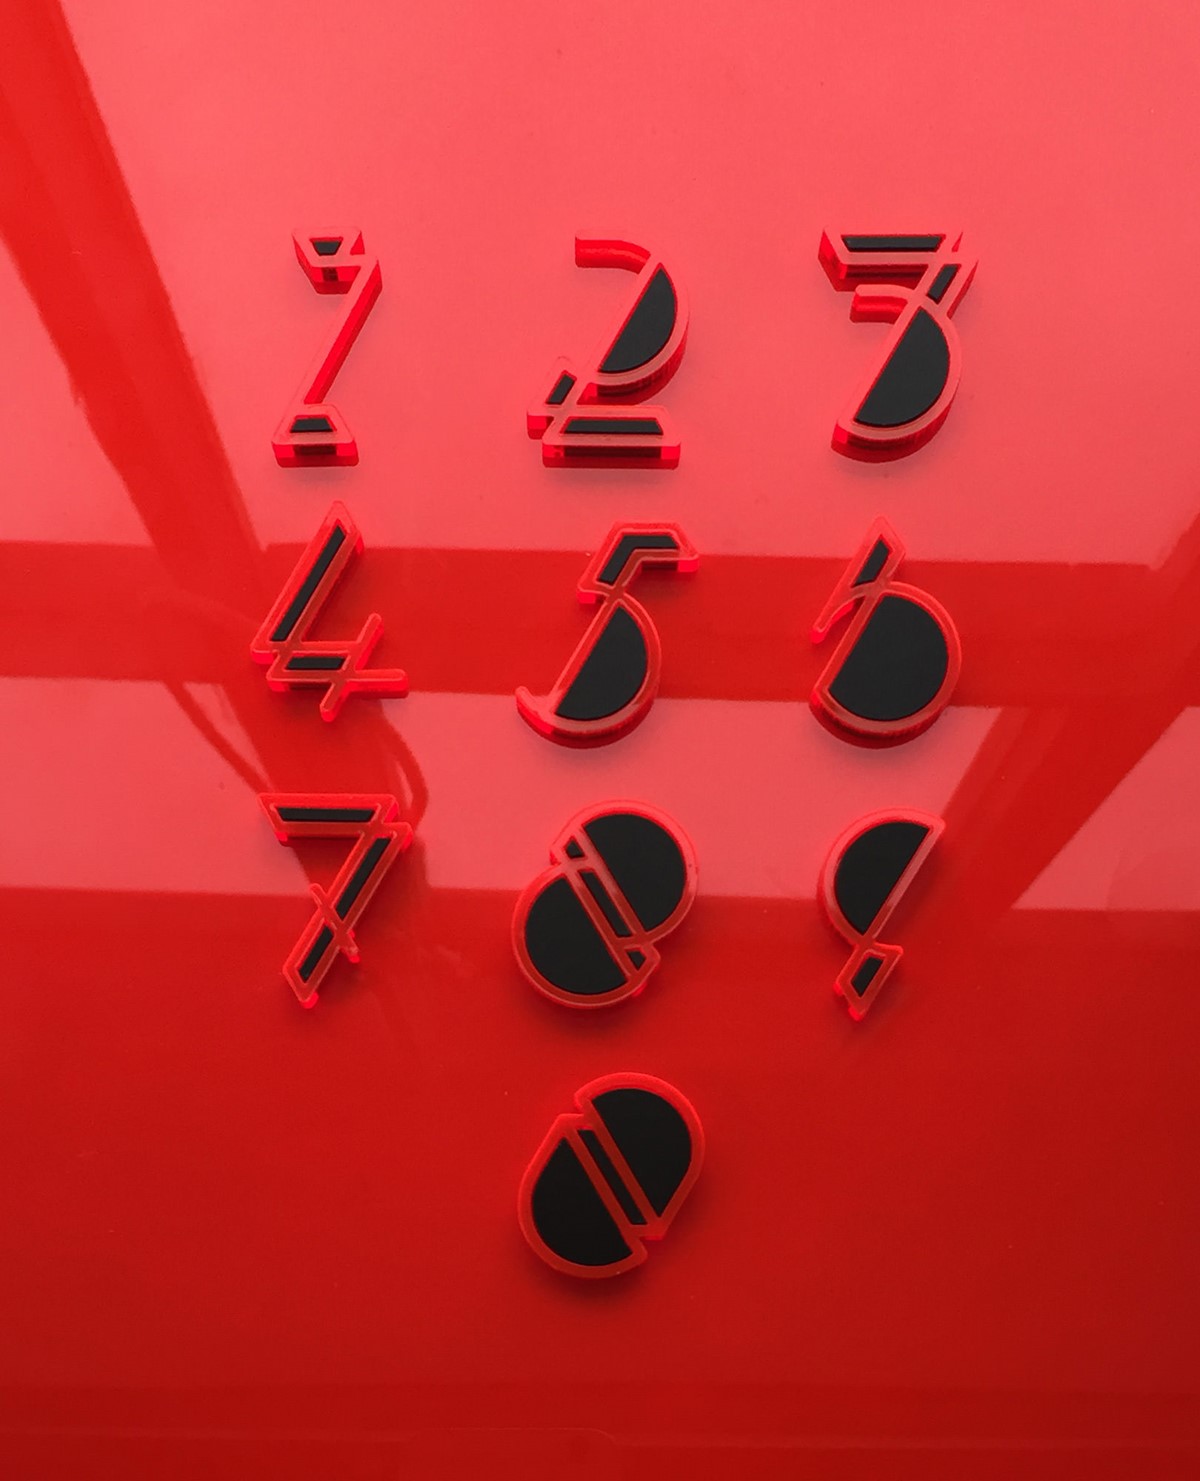 Flex. Fred Aldous. Experimental laser cut numerals on red plastic. Typography design by Superfried.